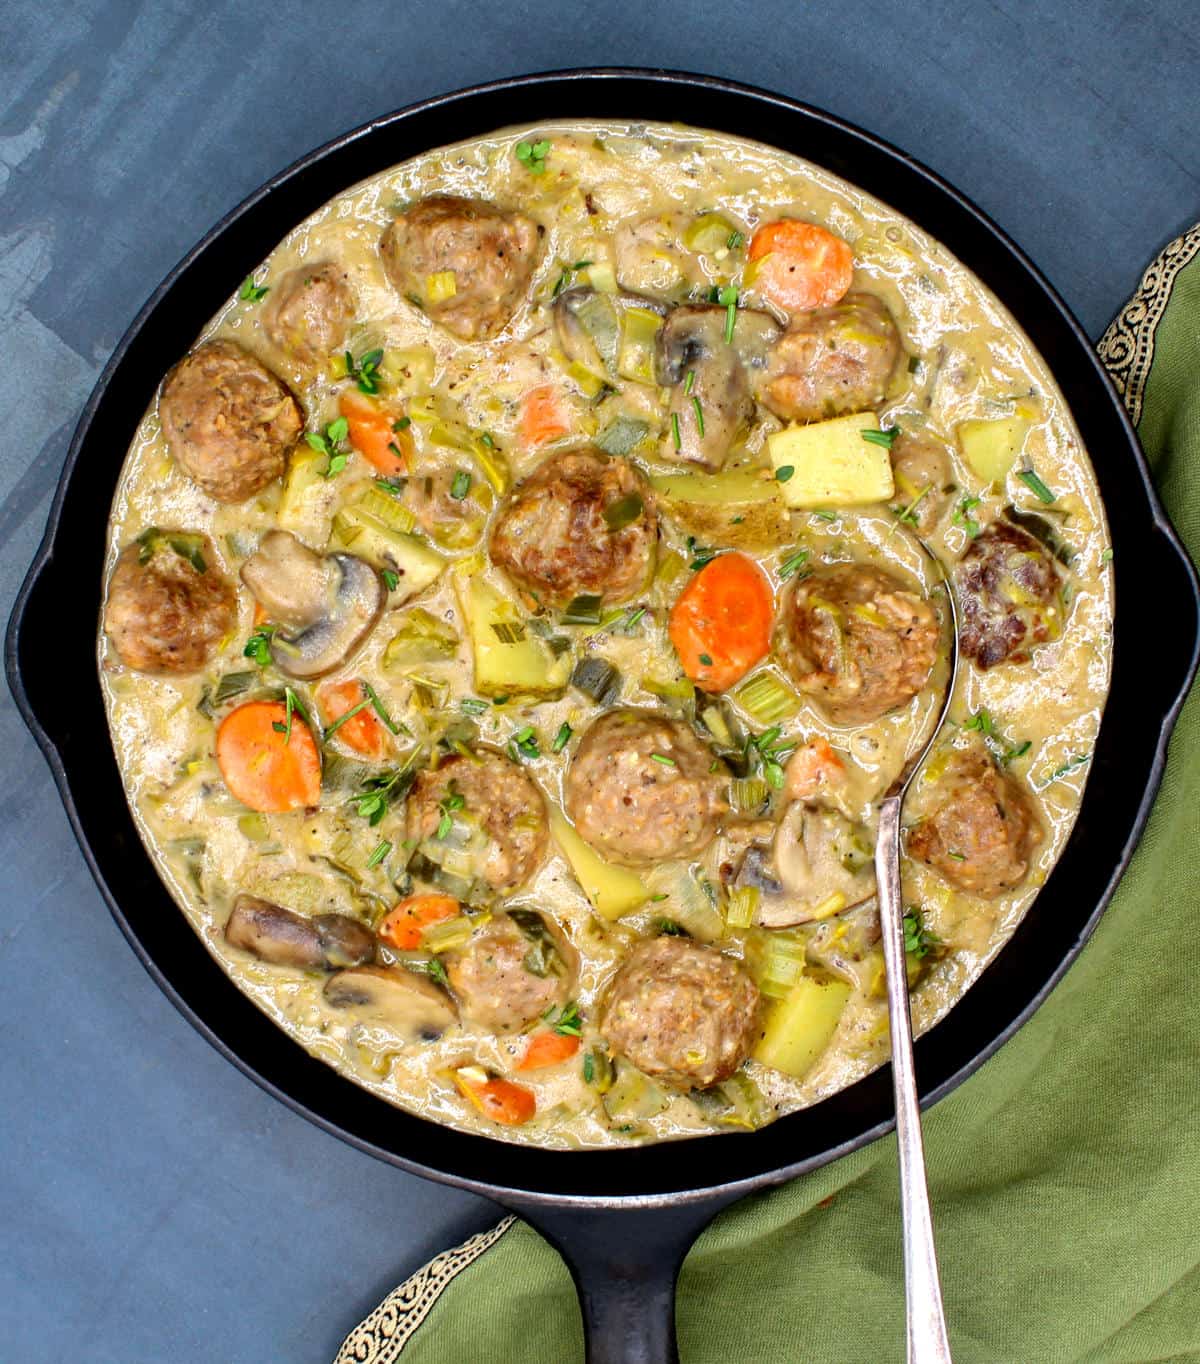 Vegan fricassee with meatballs and veggies.